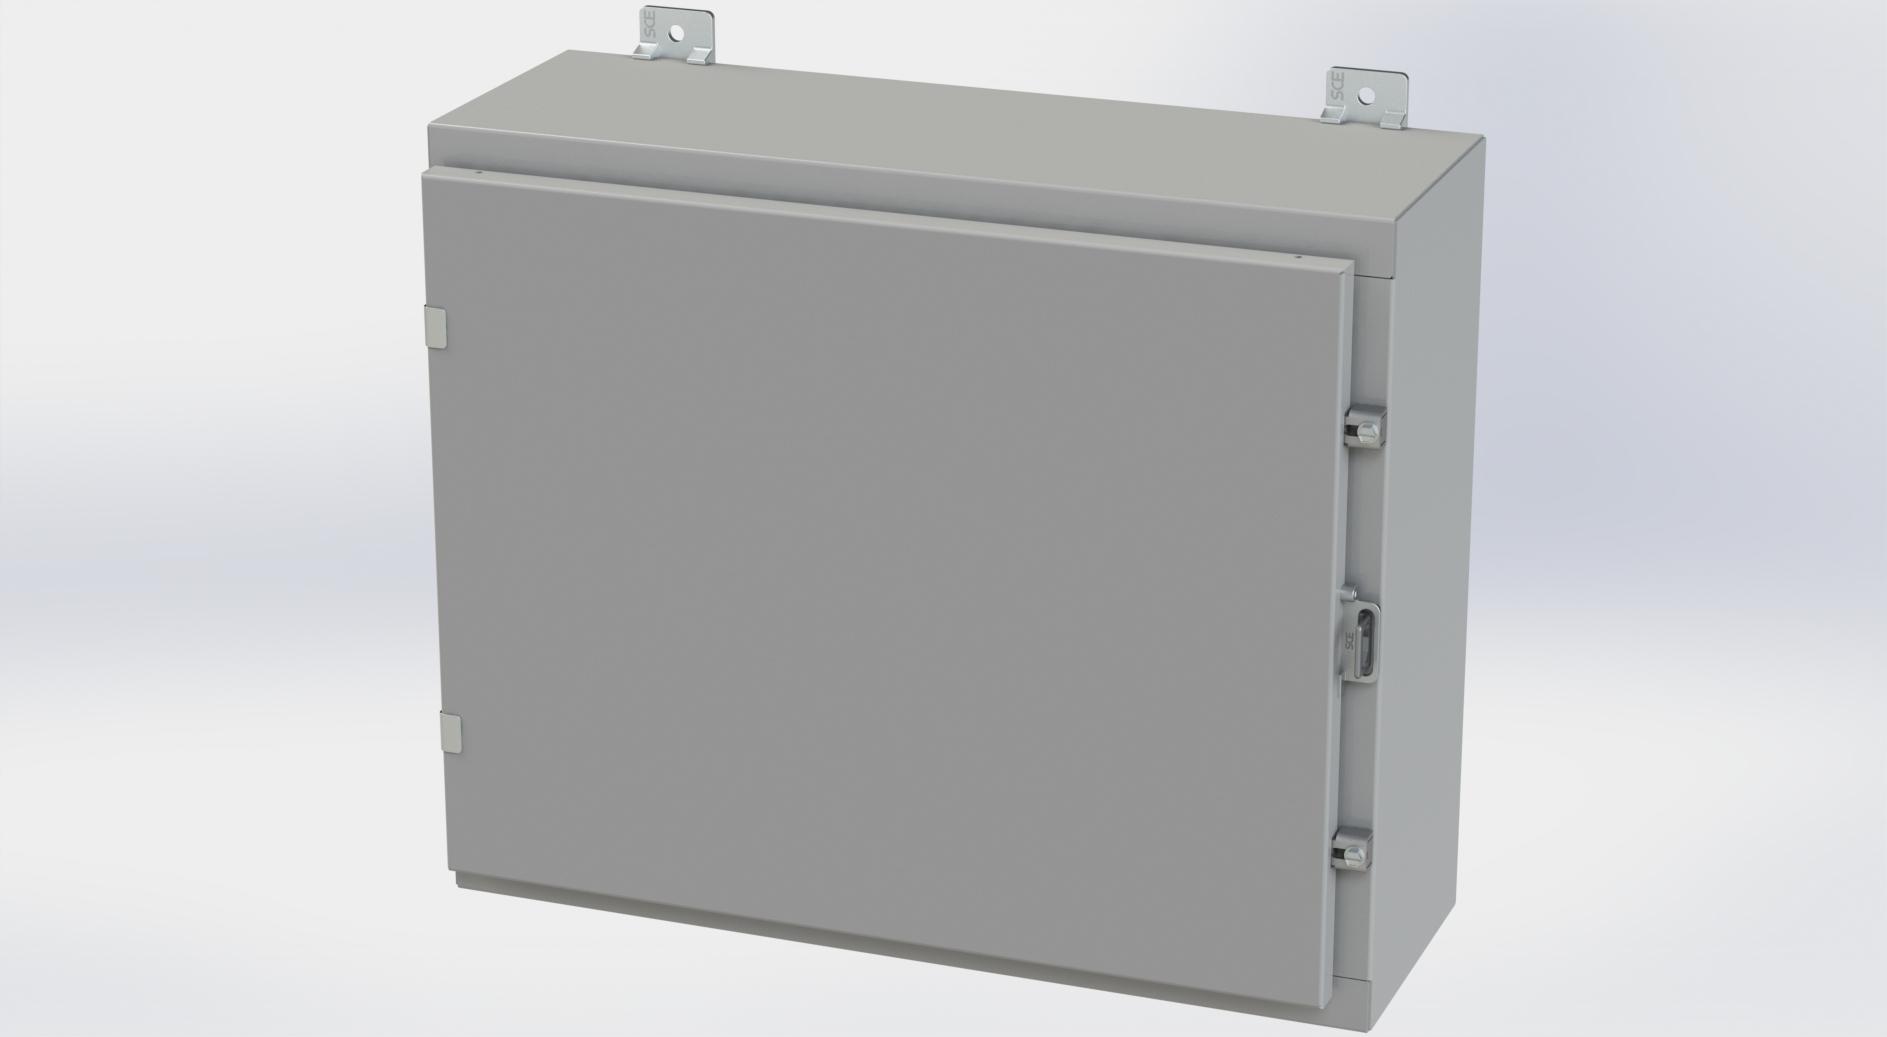 Saginaw Control SCE-20H2408LP Nema 4 LP Enclosure, Height:20.00", Width:24.00", Depth:8.00", ANSI-61 gray powder coating inside and out. Optional panels are powder coated white.